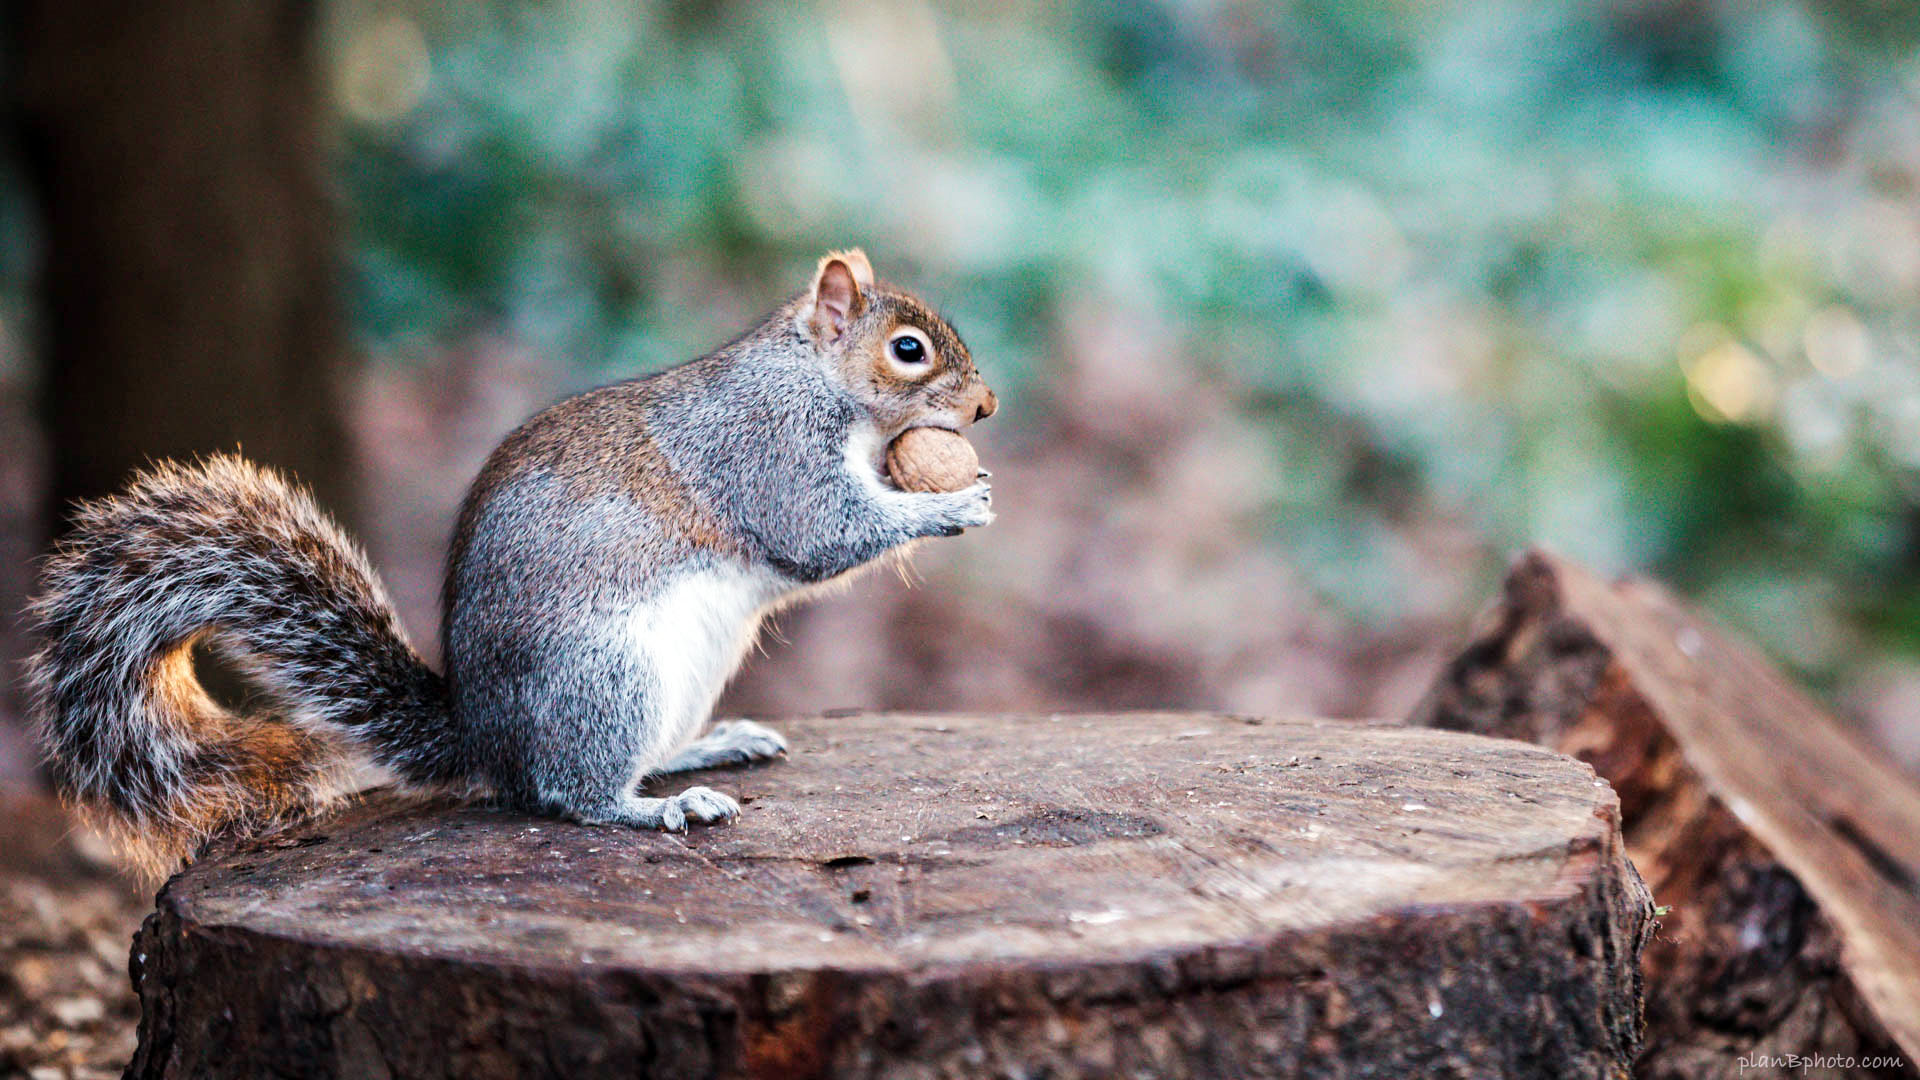 Funny grey squirrel trying to eat the whole walnut, which does not fit in its mouth